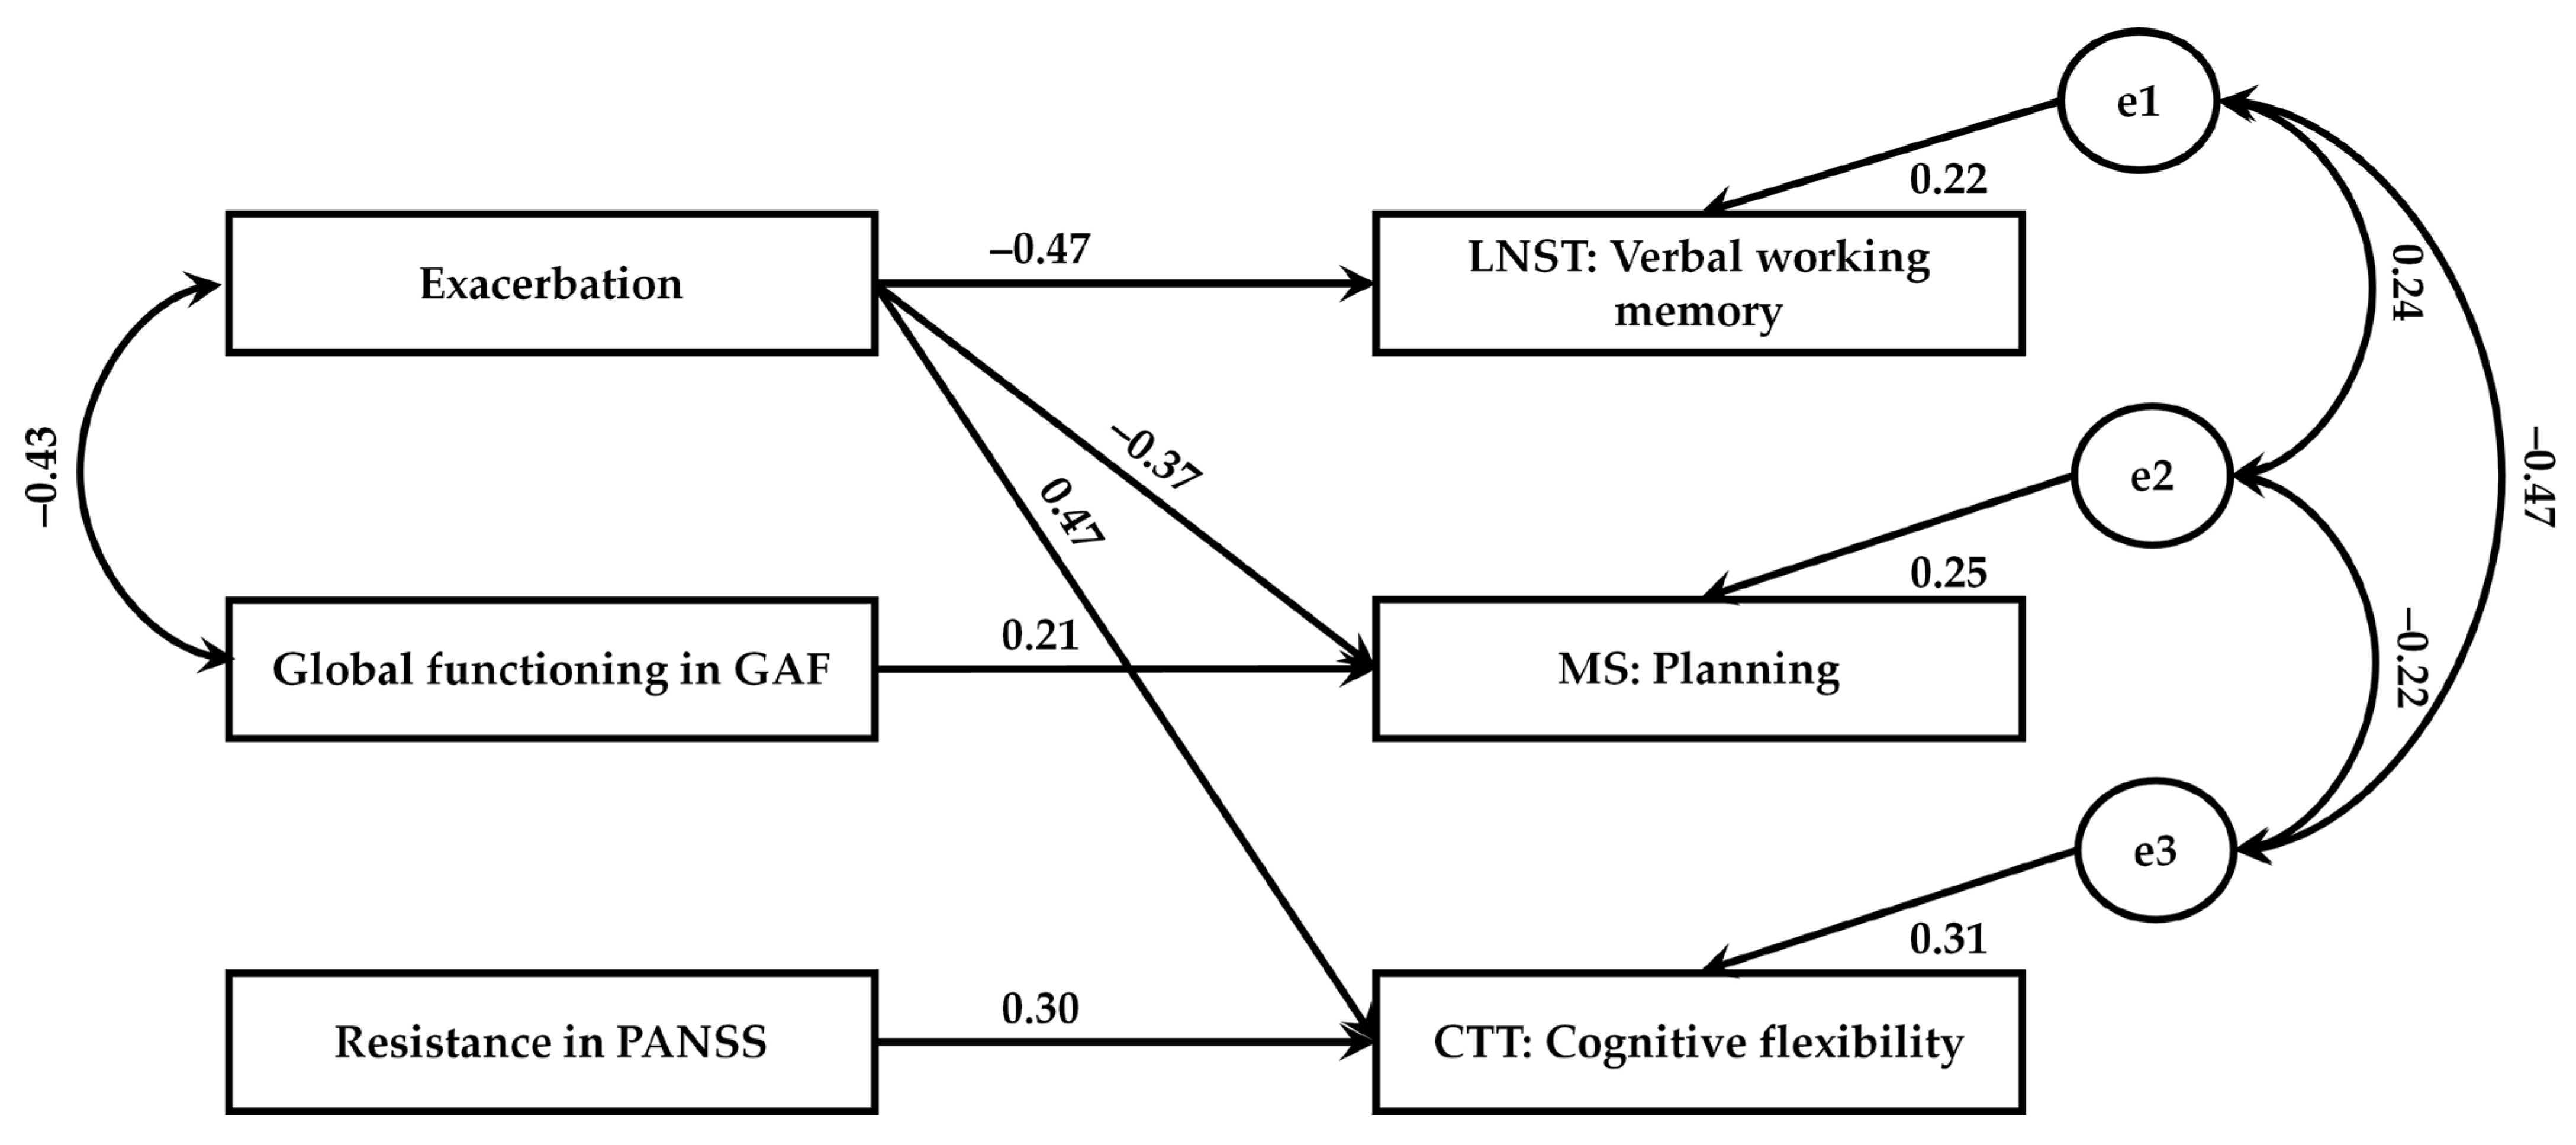 Jcm Free Full Text Executive Functions And Psychopathology Dimensions In Deficit And Non